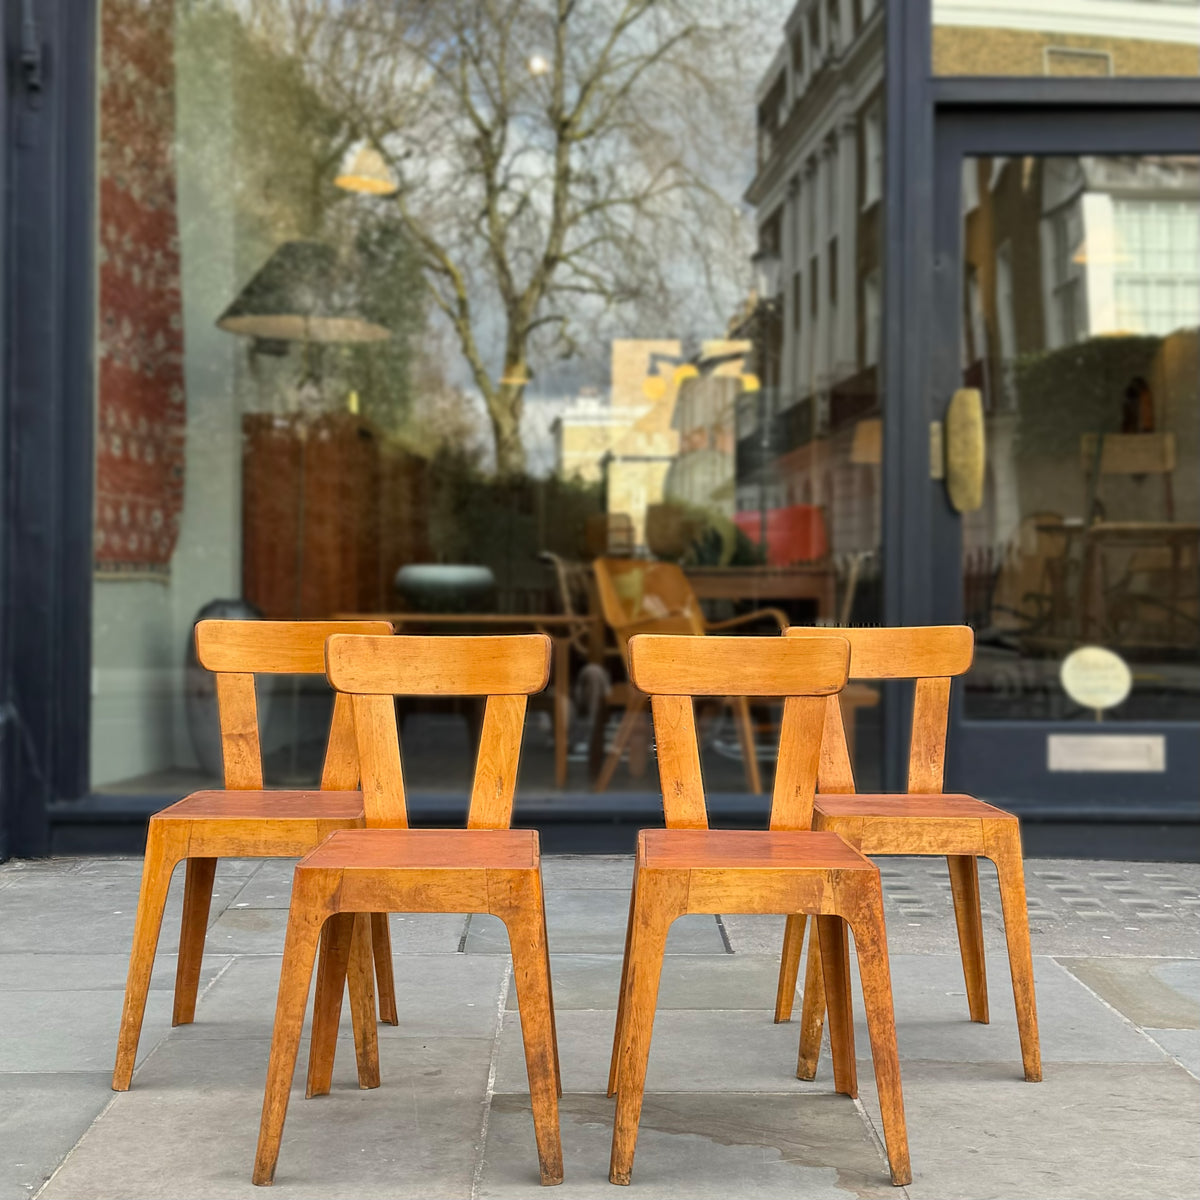 Set of 4 Birch Plywood Chairs Sweden, Early-1950s